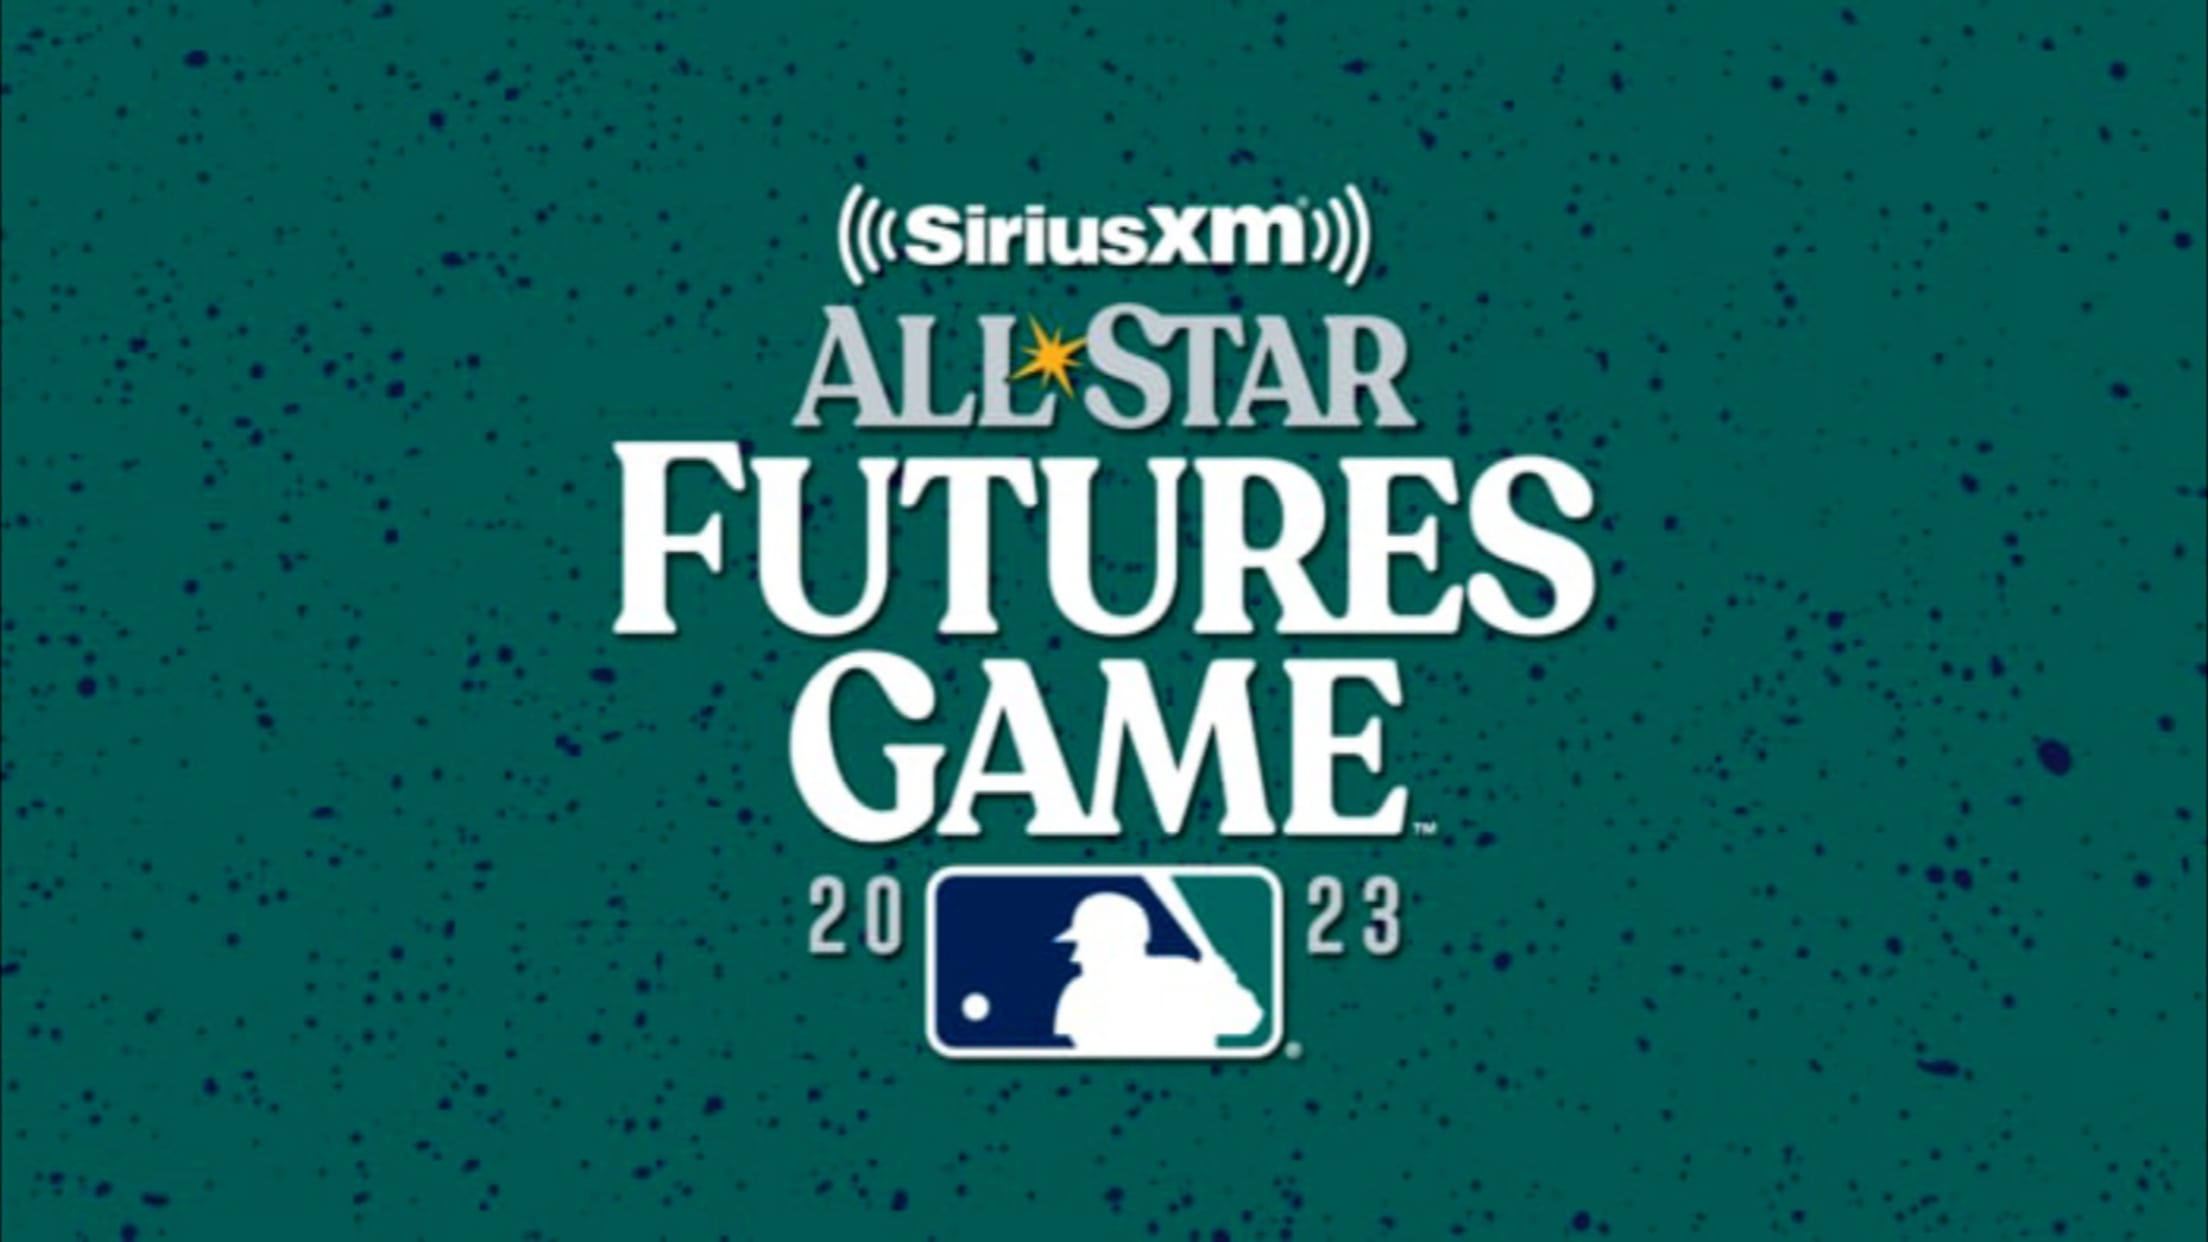 Leiter selected to play in SiriusXM All-Star Futures Game